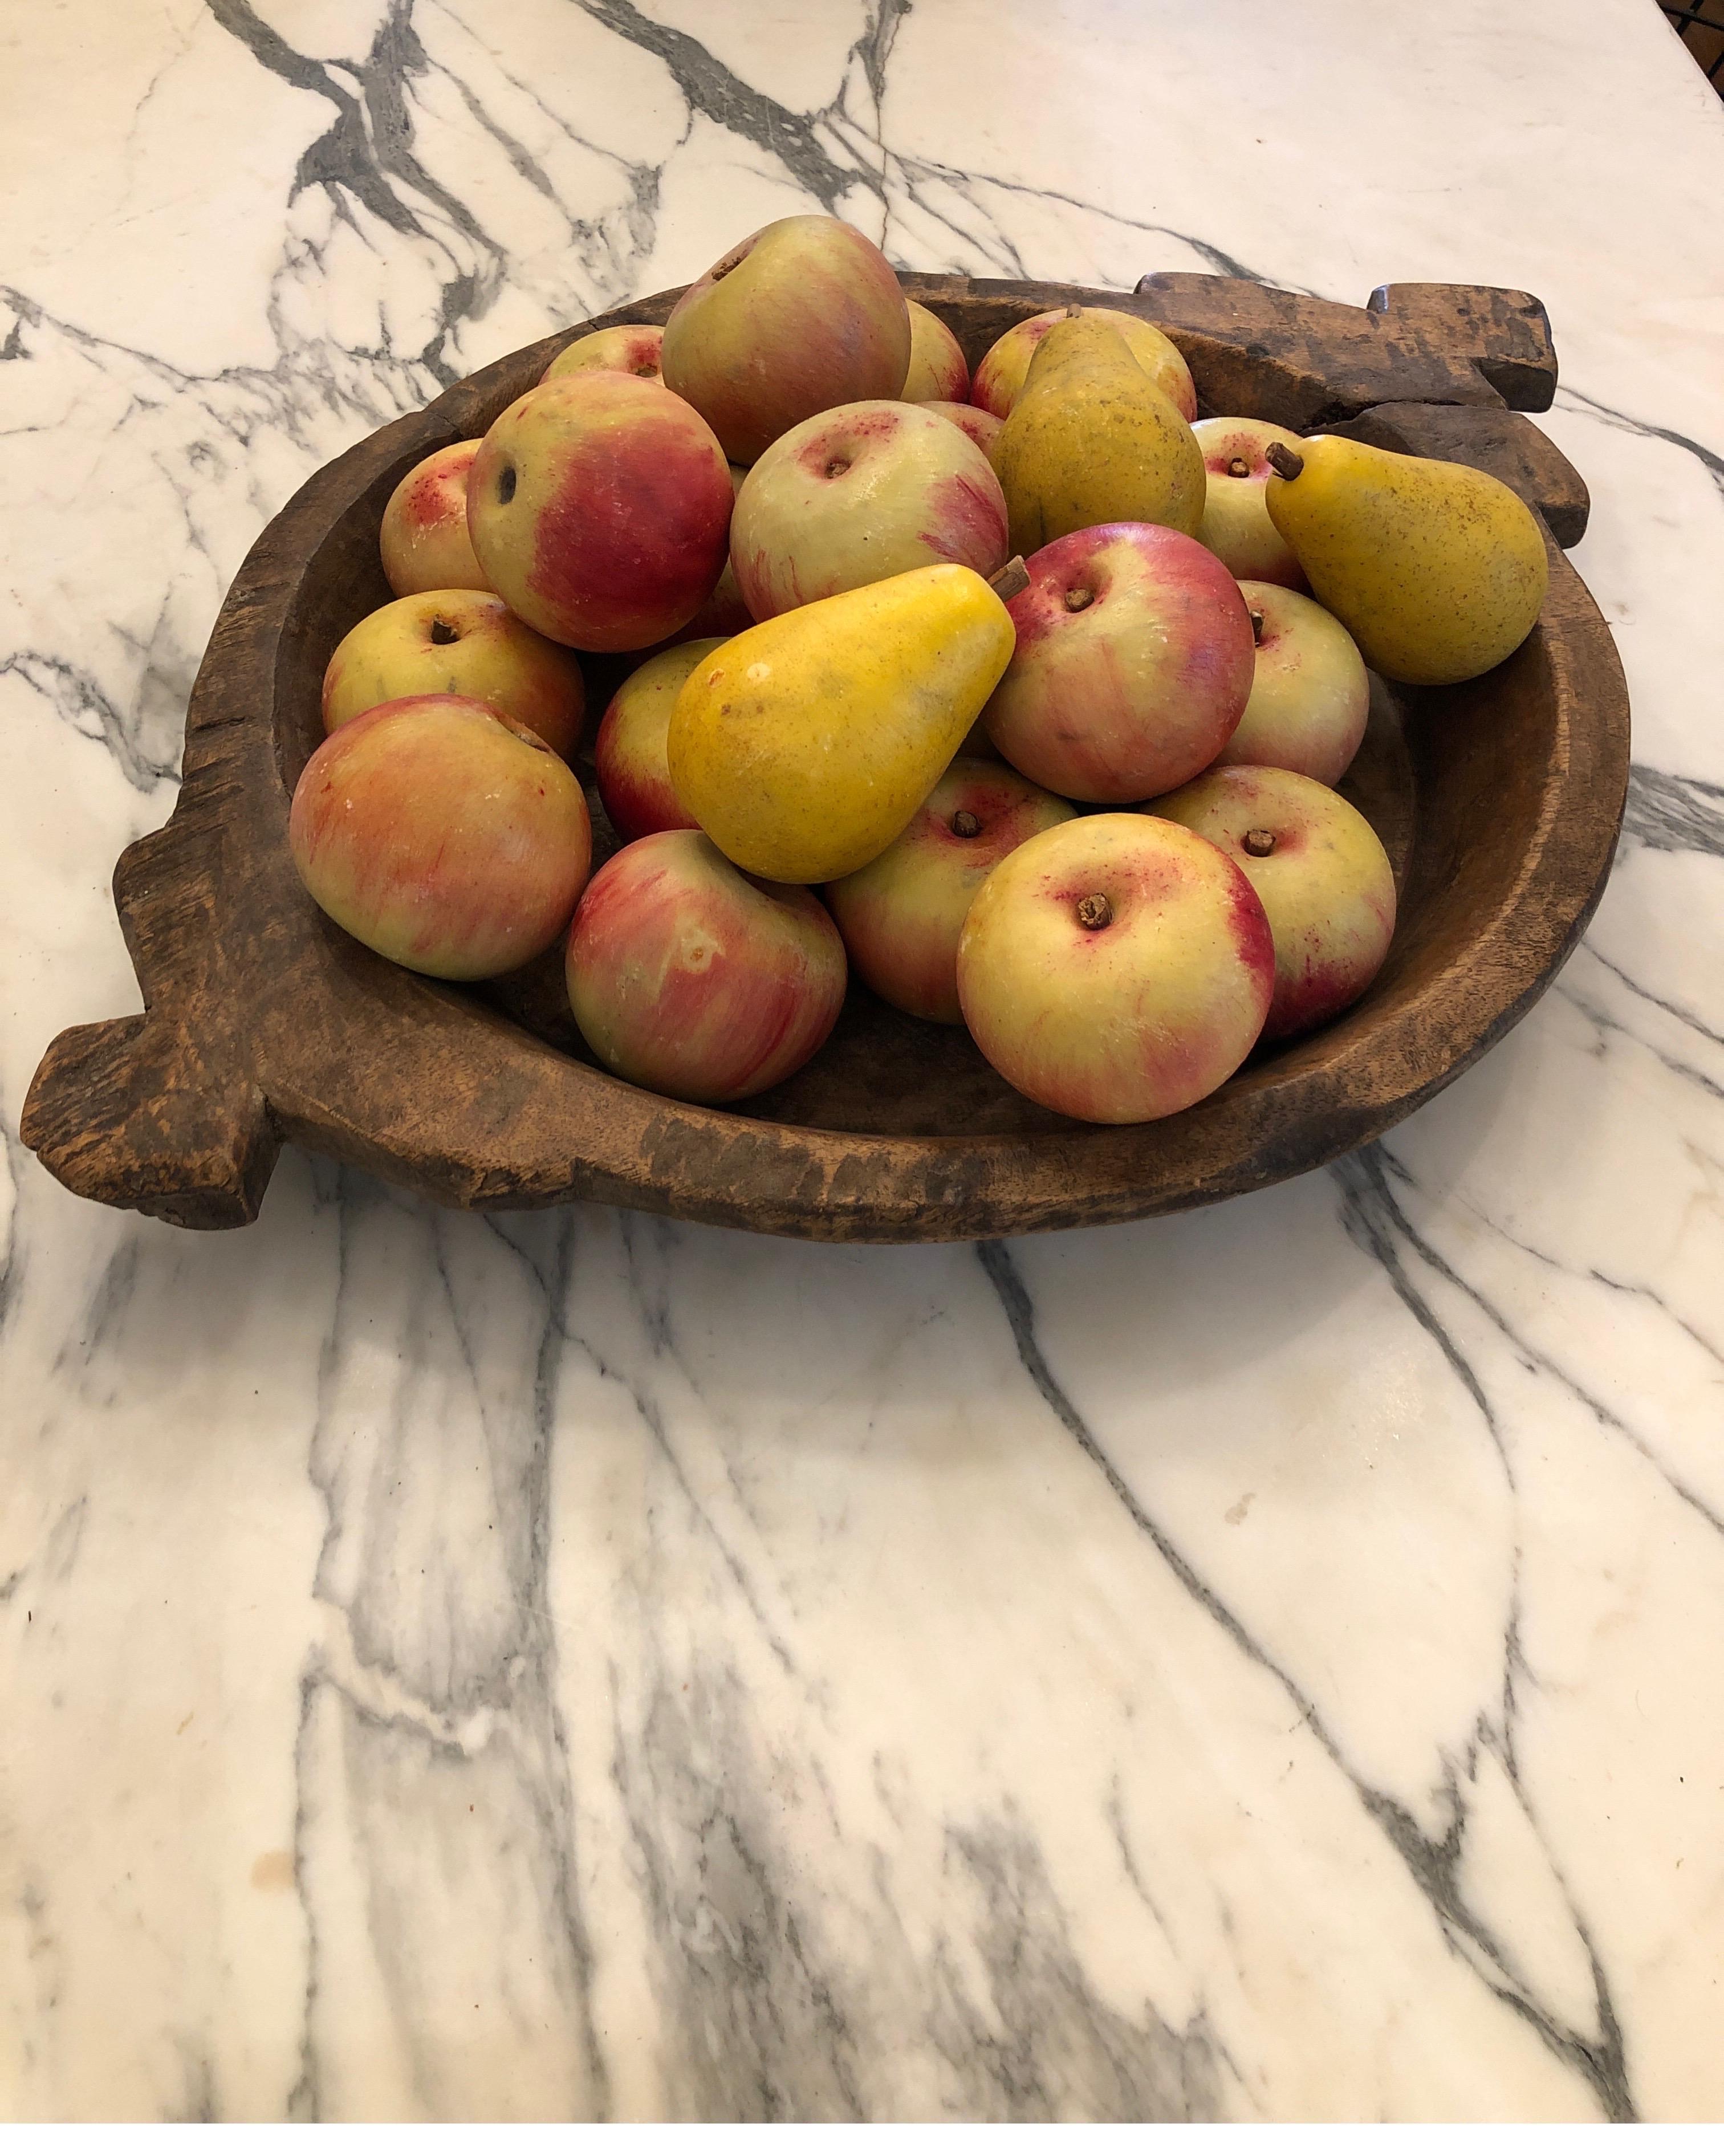 Wonderful collection of 23 hand painted life size Alabaster apples and pears. 20 apples and 3 pears. Each one is unique with very real natural colors and overall good used condition.
Included is a primitive wooden dough bowl that measures 24